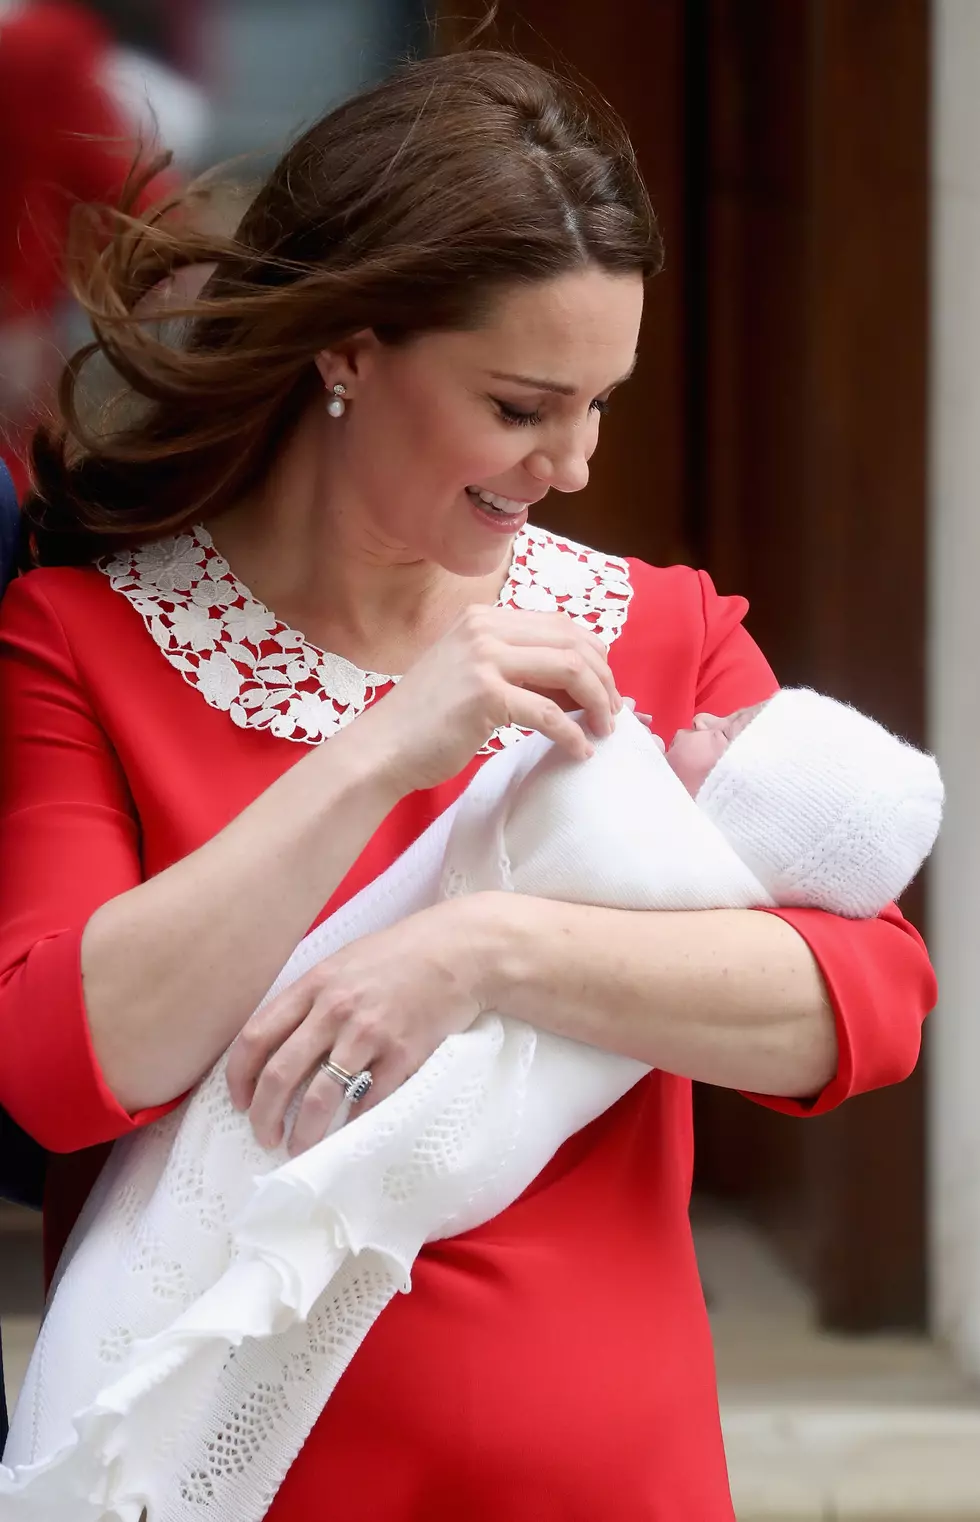 Hey Moms &#8211; Let&#8217;s Not Compare Ourselves To A Duchess, Mmmmkay?